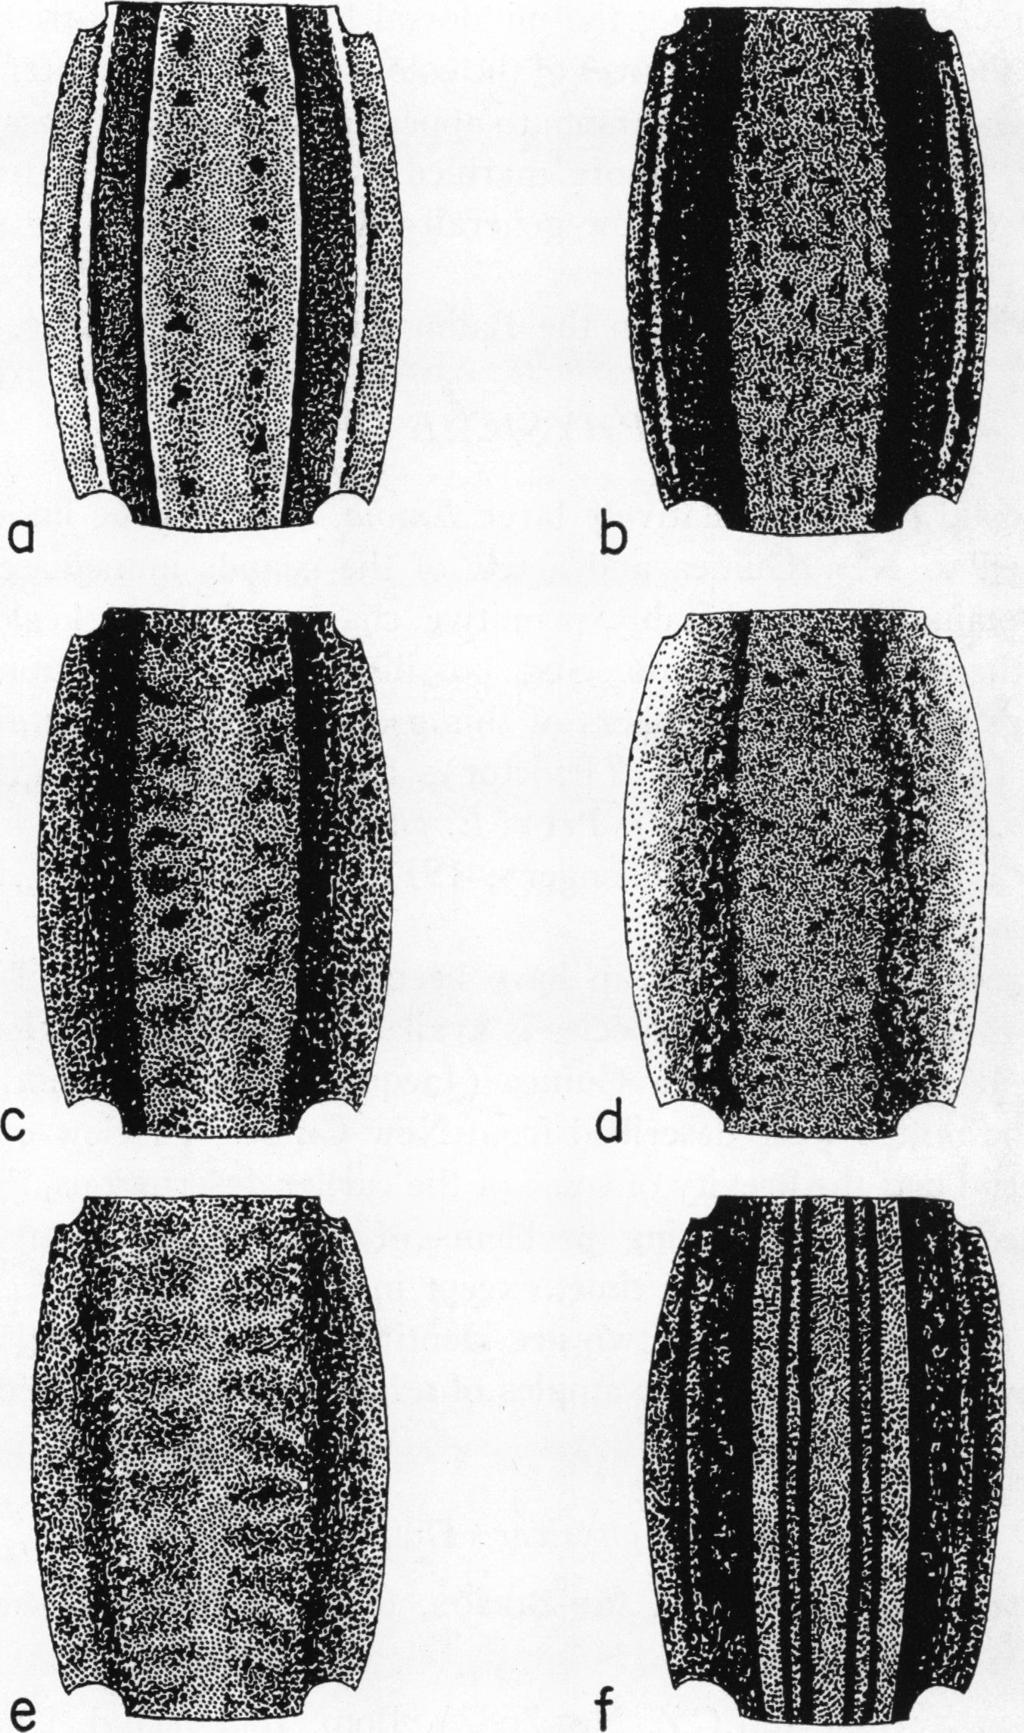 1953 BROWN: NEW GUINEA LIZARDS 19 c dt FIG. 6. Color pattern of the dorsal and lateral surfaces of the body. A. Emoia pallidiceps. B. E. loveridgei. C. E. submetallica submetallica. D. E. s. obscura.